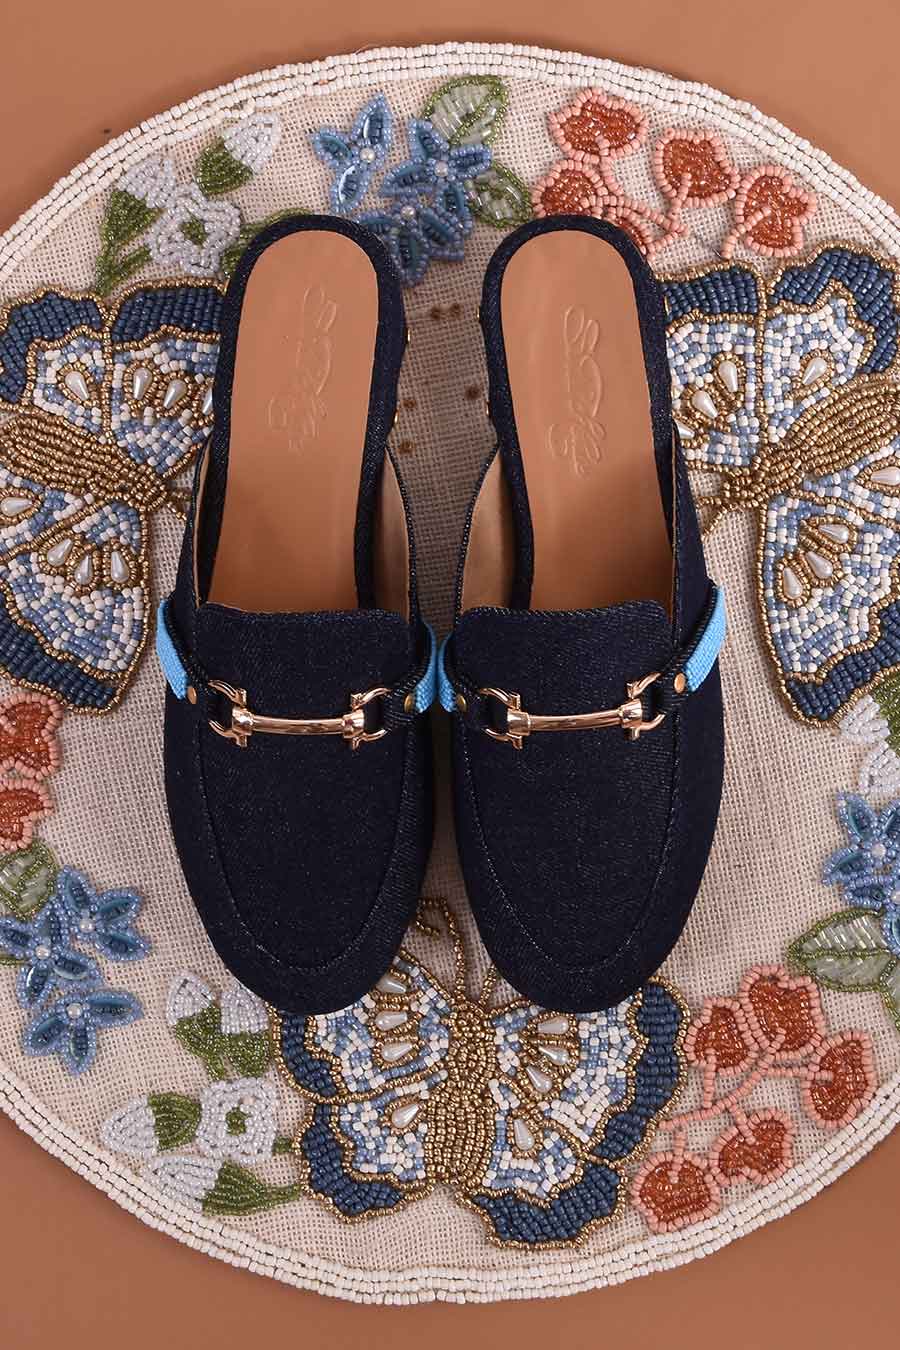 Turquoise Beaded Denim Loafers